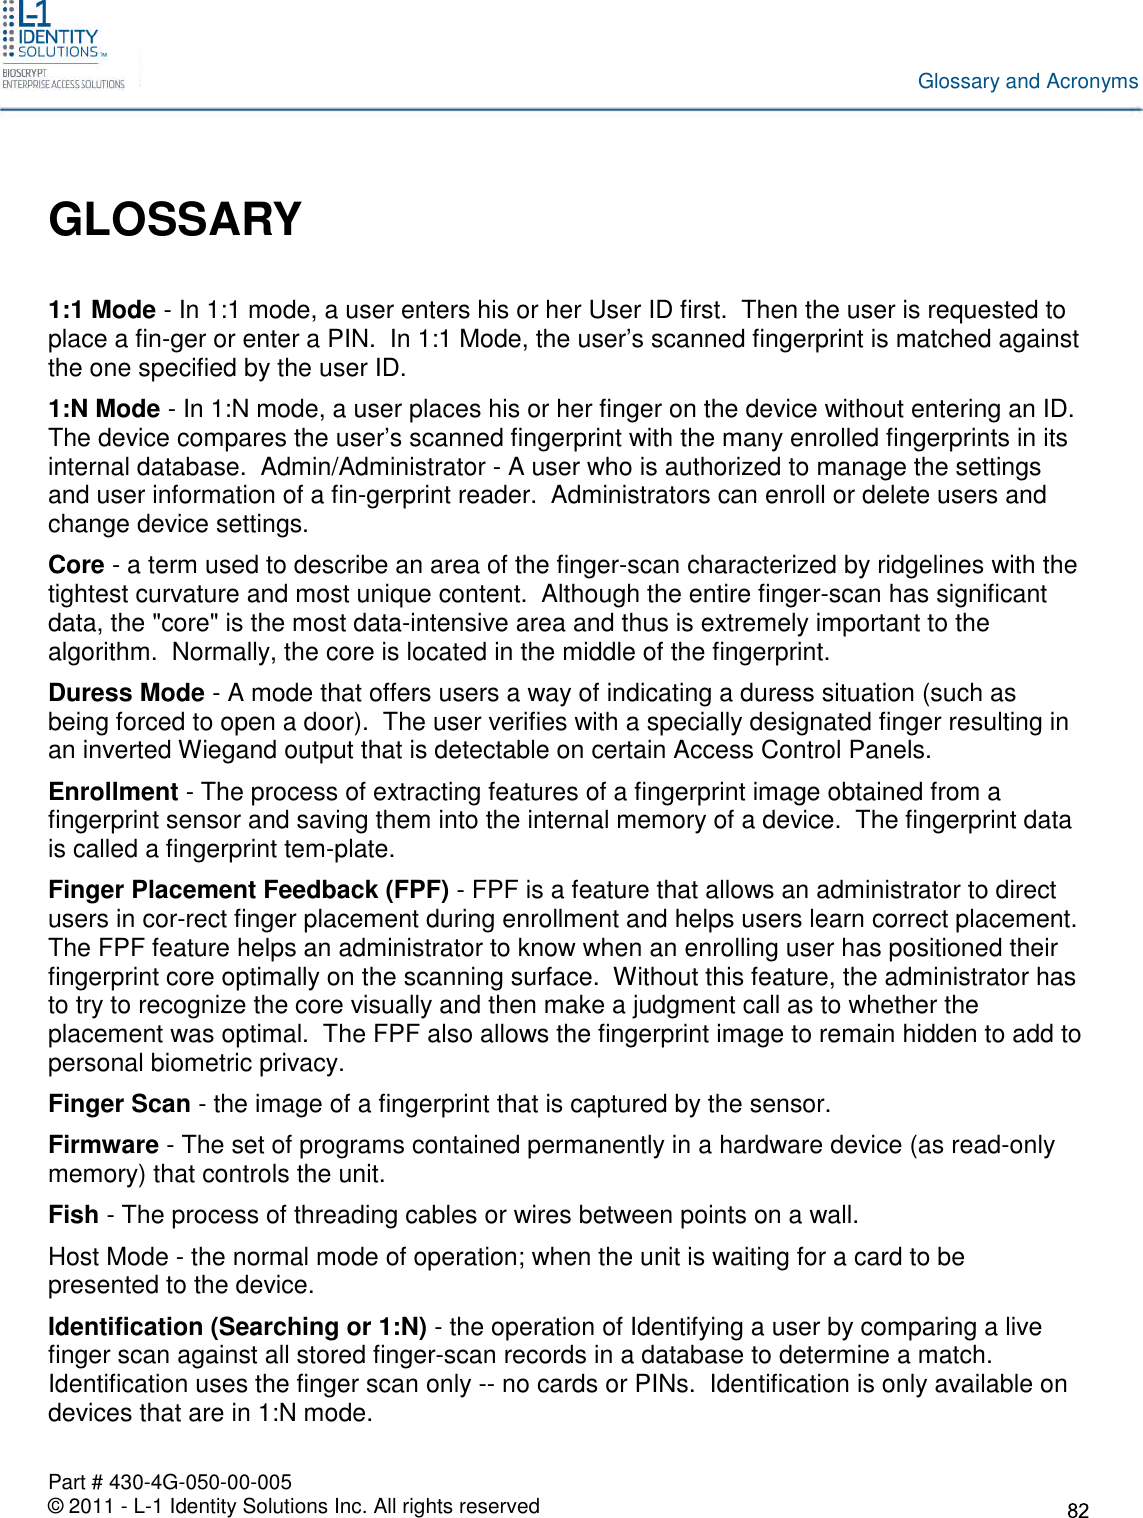 Part # 430-4G-050-00-005© 2011 - L-1 Identity Solutions Inc. All rights reservedGlossary and AcronymsGLOSSARY1:1 Mode - In 1:1 mode, a user enters his or her User ID first. Then the user is requested toplace a fin-ger or enter a PIN. In 1:1 Mode, the user’s scanned fingerprint is matched againstthe one specified by the user ID.1:N Mode - In 1:N mode, a user places his or her finger on the device without entering an ID.The device compares the user’s scanned fingerprint with the many enrolled fingerprints in itsinternal database. Admin/Administrator - A user who is authorized to manage the settingsand user information of a fin-gerprint reader. Administrators can enroll or delete users andchange device settings.Core - a term used to describe an area of the finger-scan characterized by ridgelines with thetightest curvature and most unique content. Although the entire finger-scan has significantdata, the &quot;core&quot; is the most data-intensive area and thus is extremely important to thealgorithm. Normally, the core is located in the middle of the fingerprint.Duress Mode - A mode that offers users a way of indicating a duress situation (such asbeing forced to open a door). The user verifies with a specially designated finger resulting inan inverted Wiegand output that is detectable on certain Access Control Panels.Enrollment - The process of extracting features of a fingerprint image obtained from afingerprint sensor and saving them into the internal memory of a device. The fingerprint datais called a fingerprint tem-plate.Finger Placement Feedback (FPF) - FPF is a feature that allows an administrator to directusers in cor-rect finger placement during enrollment and helps users learn correct placement.The FPF feature helps an administrator to know when an enrolling user has positioned theirfingerprint core optimally on the scanning surface. Without this feature, the administrator hasto try to recognize the core visually and then make a judgment call as to whether theplacement was optimal. The FPF also allows the fingerprint image to remain hidden to add topersonal biometric privacy.Finger Scan - the image of a fingerprint that is captured by the sensor.Firmware - The set of programs contained permanently in a hardware device (as read-onlymemory) that controls the unit.Fish - The process of threading cables or wires between points on a wall.Host Mode - the normal mode of operation; when the unit is waiting for a card to bepresented to the device.Identification (Searching or 1:N) - the operation of Identifying a user by comparing a livefinger scan against all stored finger-scan records in a database to determine a match.Identification uses the finger scan only -- no cards or PINs. Identification is only available ondevices that are in 1:N mode.